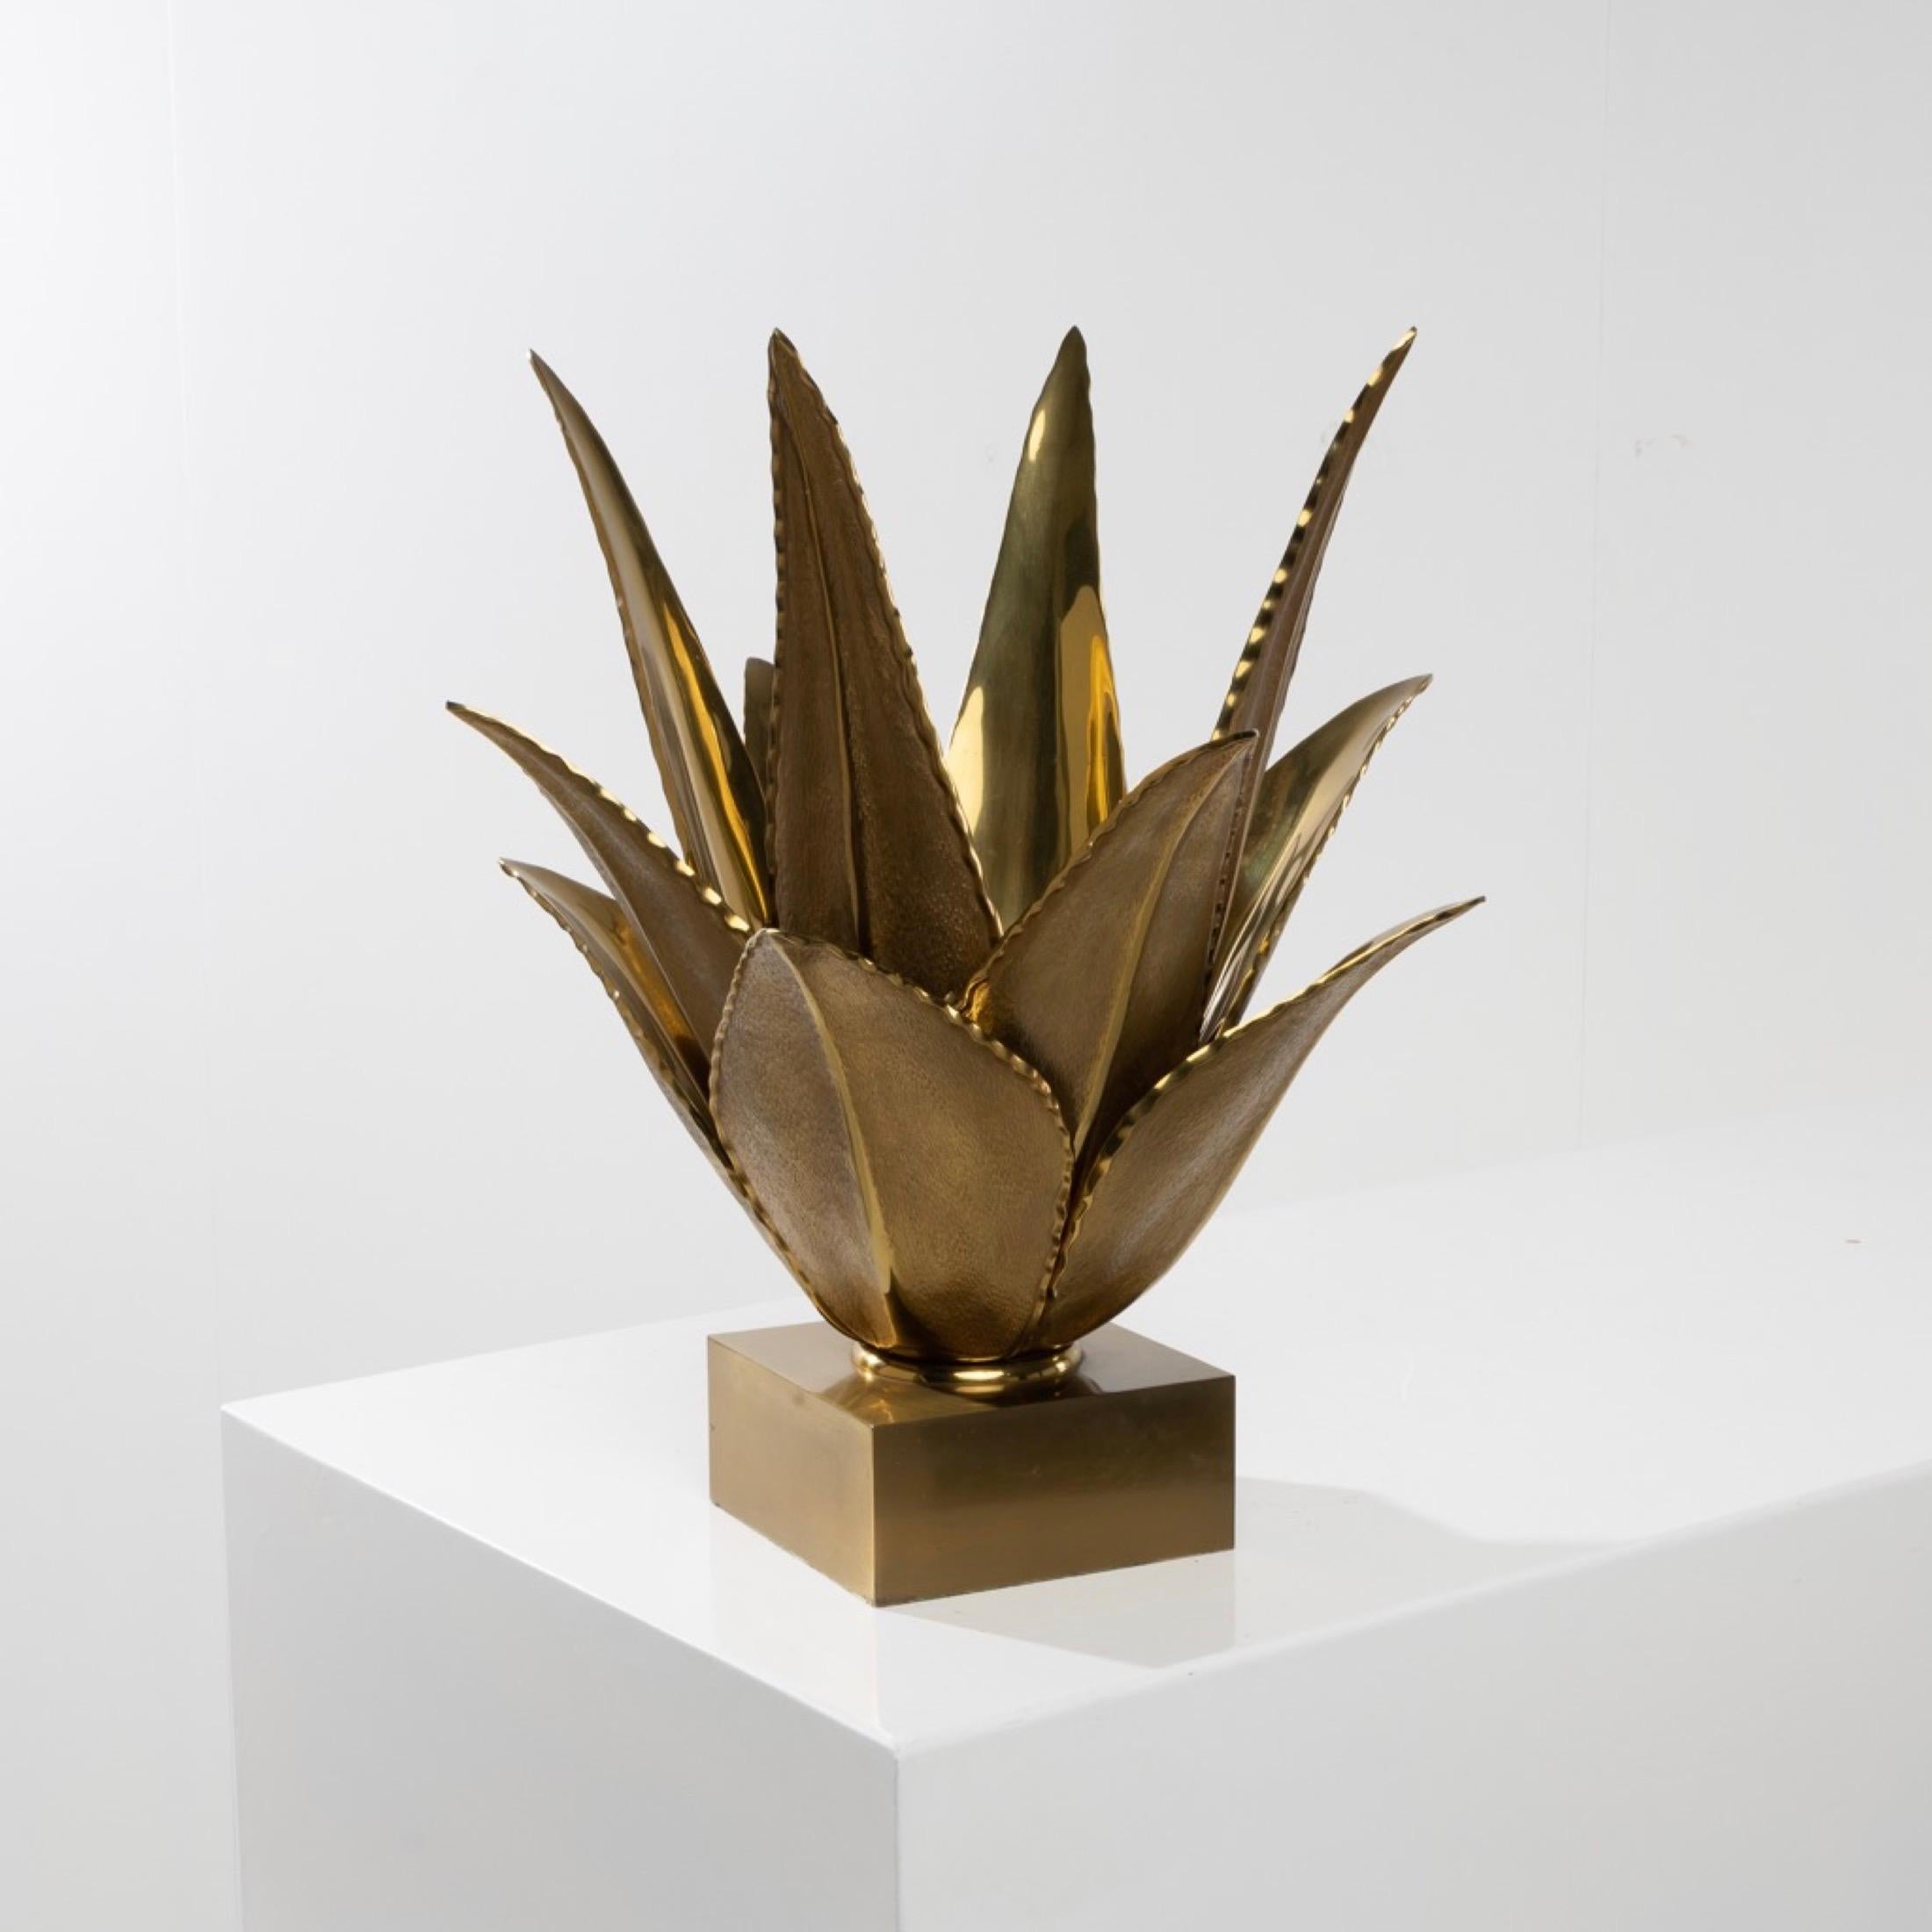 Imposing table lamp representing an aloes in bronze with medal patina.
Square base receiving 12 large “leaves” forming an Aloe (Aloe Vera).
Finish in light medal patina, very pretty carvings and superb details.
Electrification redone to European